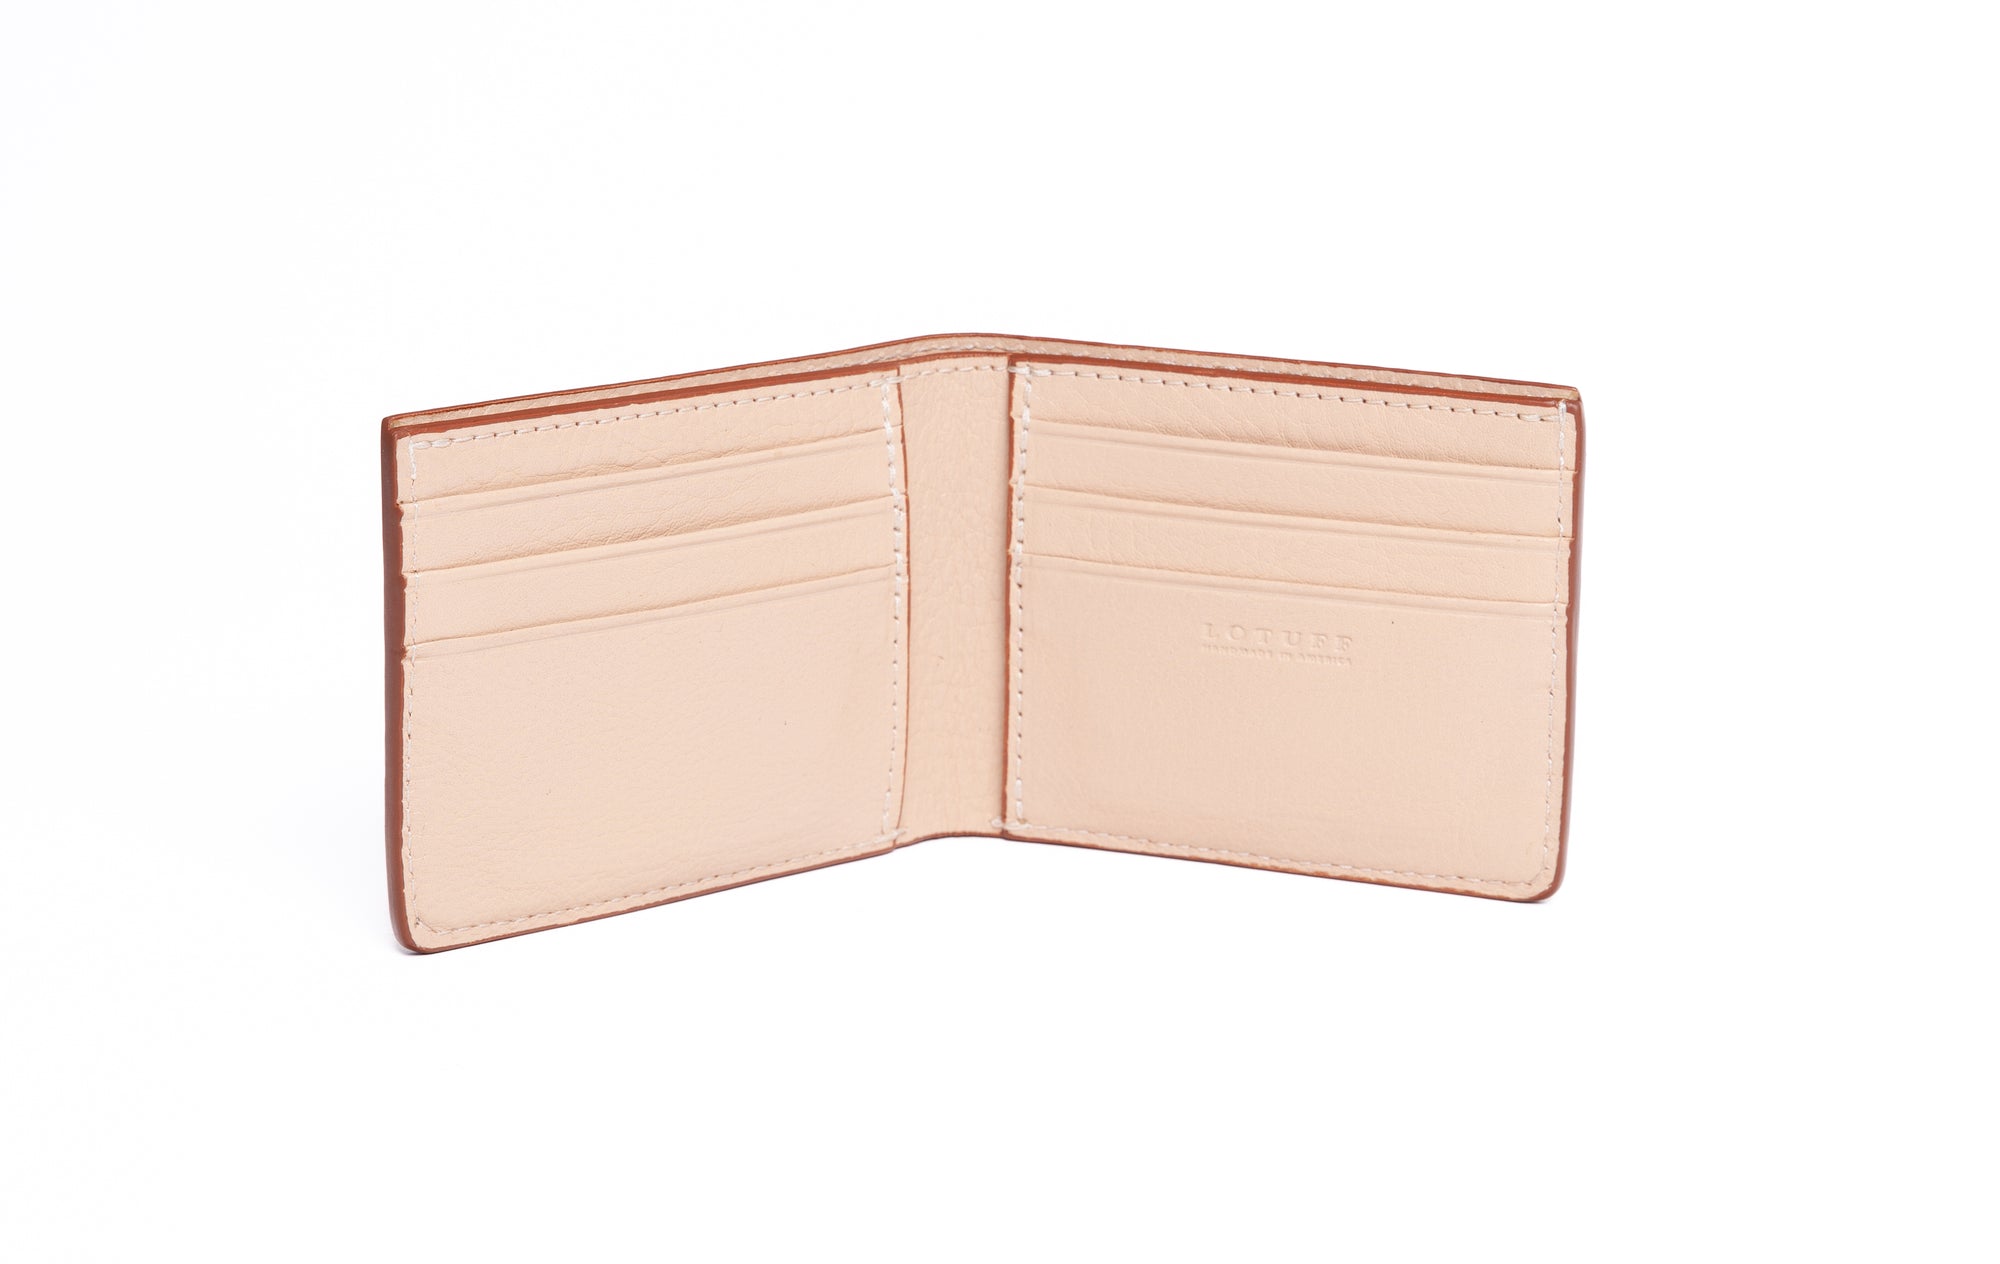 Leather Bifold Wallet Natural